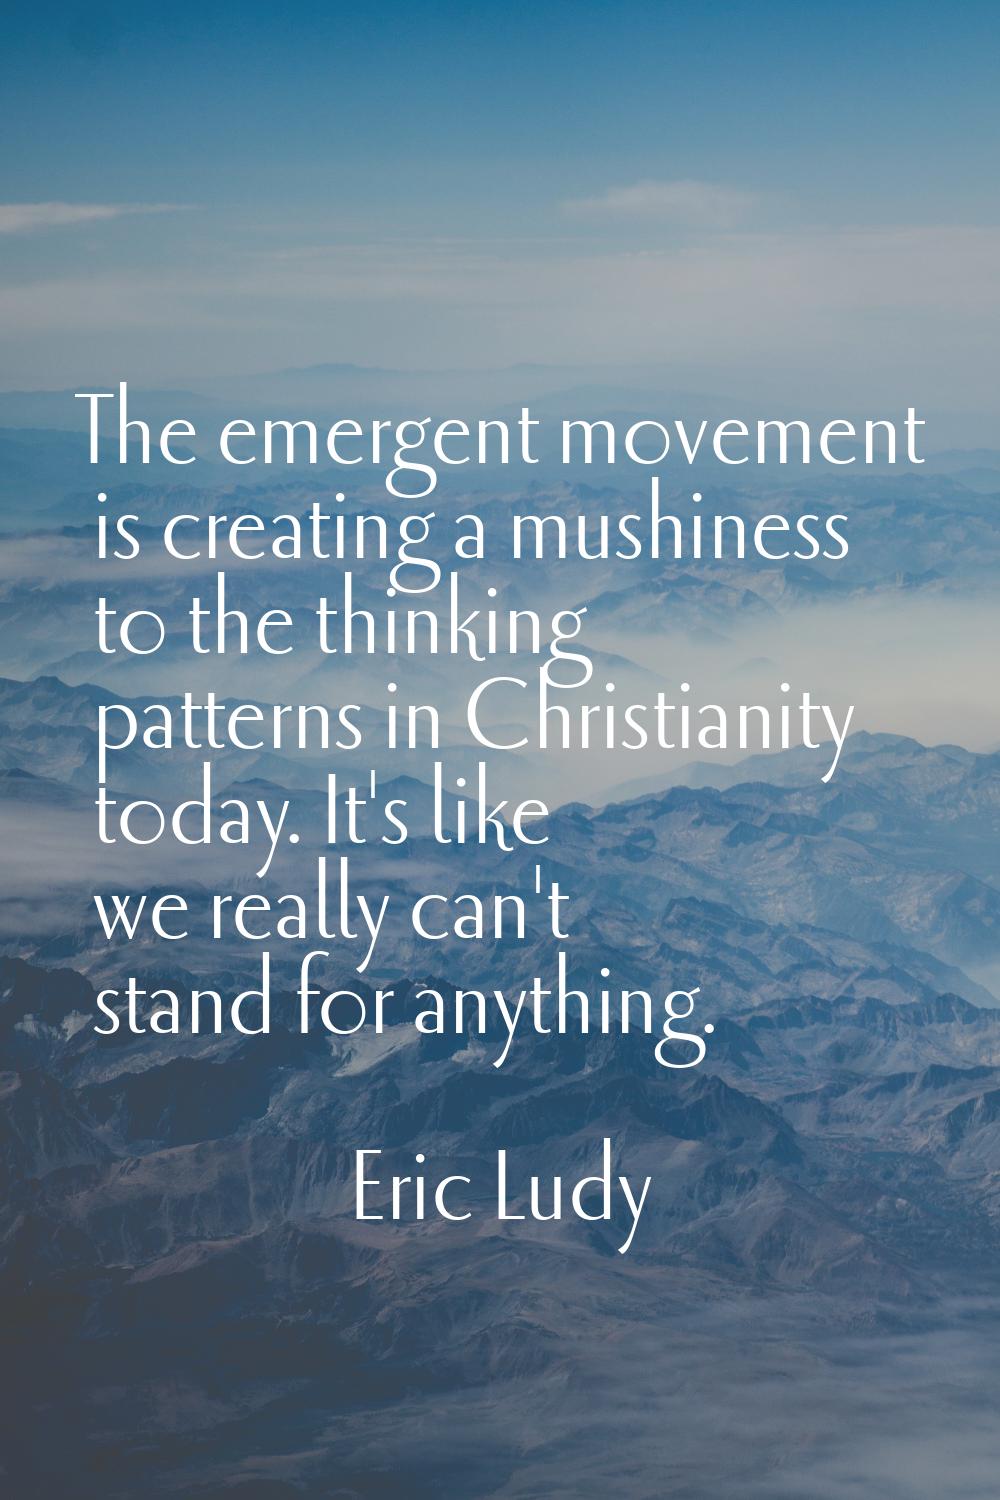 The emergent movement is creating a mushiness to the thinking patterns in Christianity today. It's 